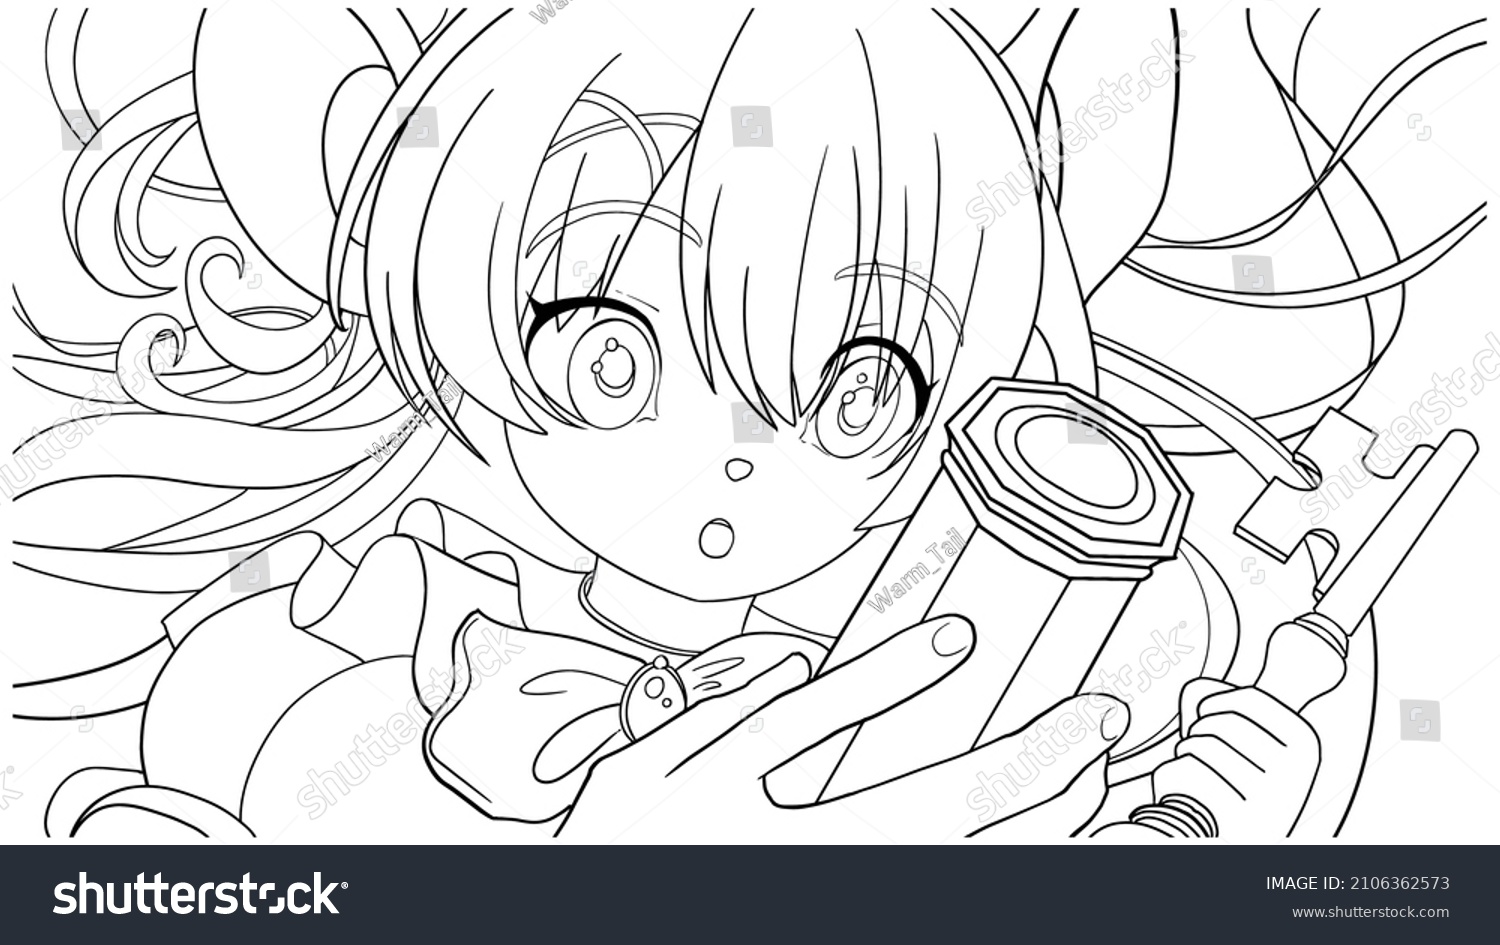 Anime coloring book Images, Stock Photos & Vectors   Shutterstock